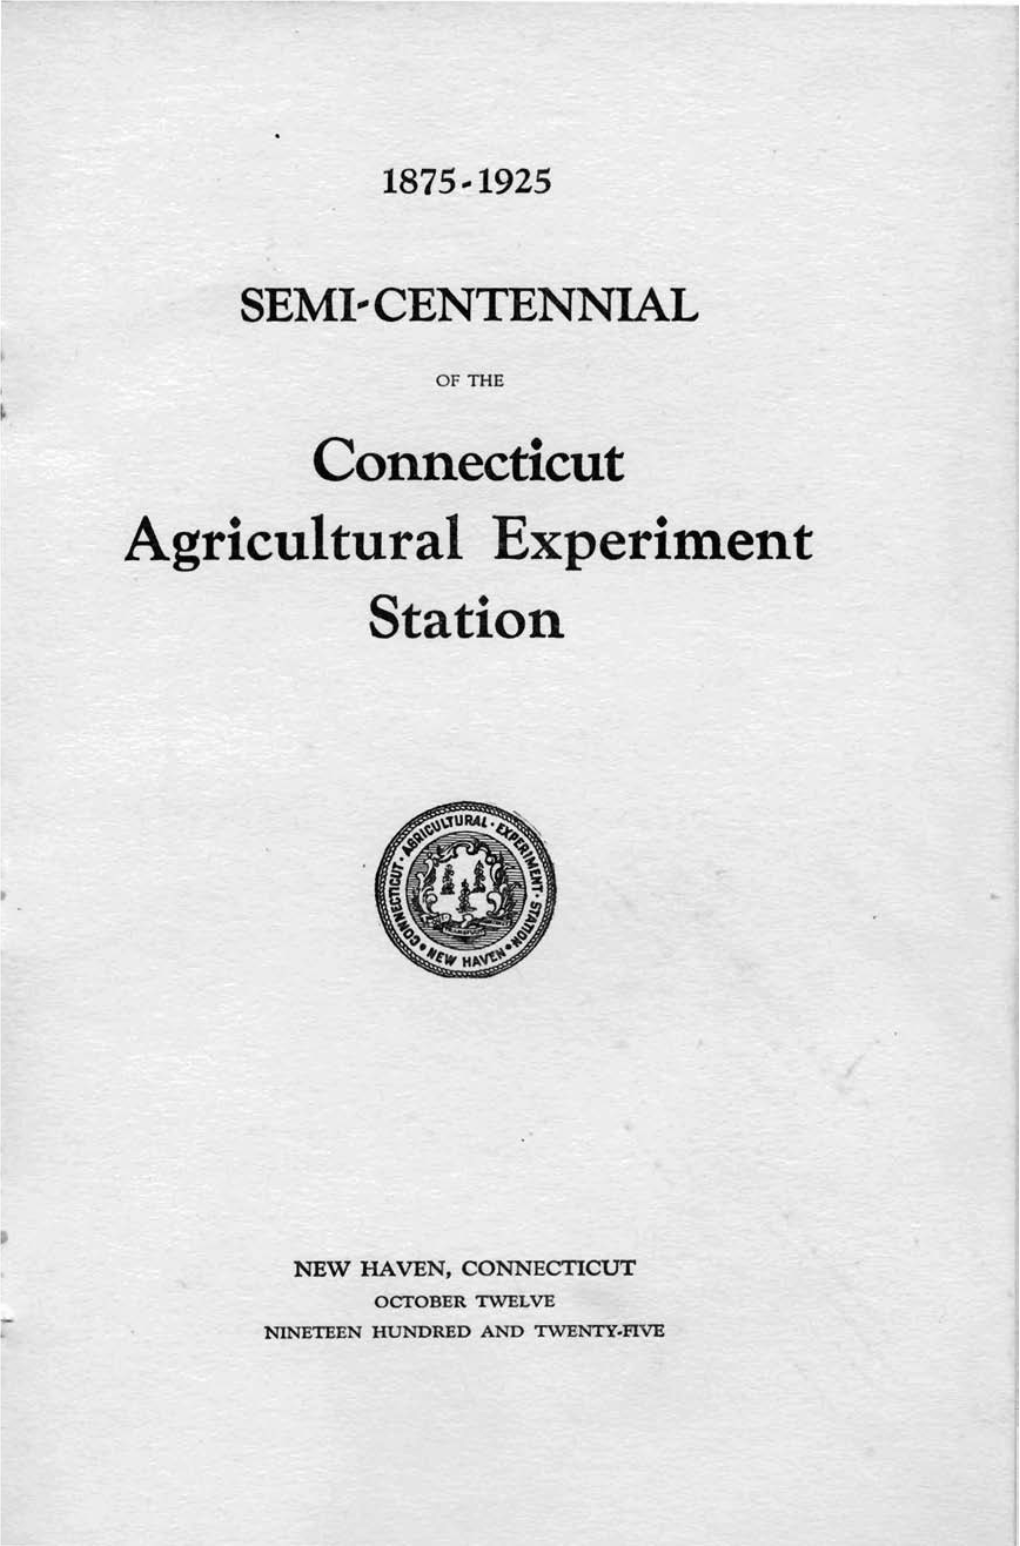 1875-1925 Semi-Centennial of the Connecticut Agricultural Experiment